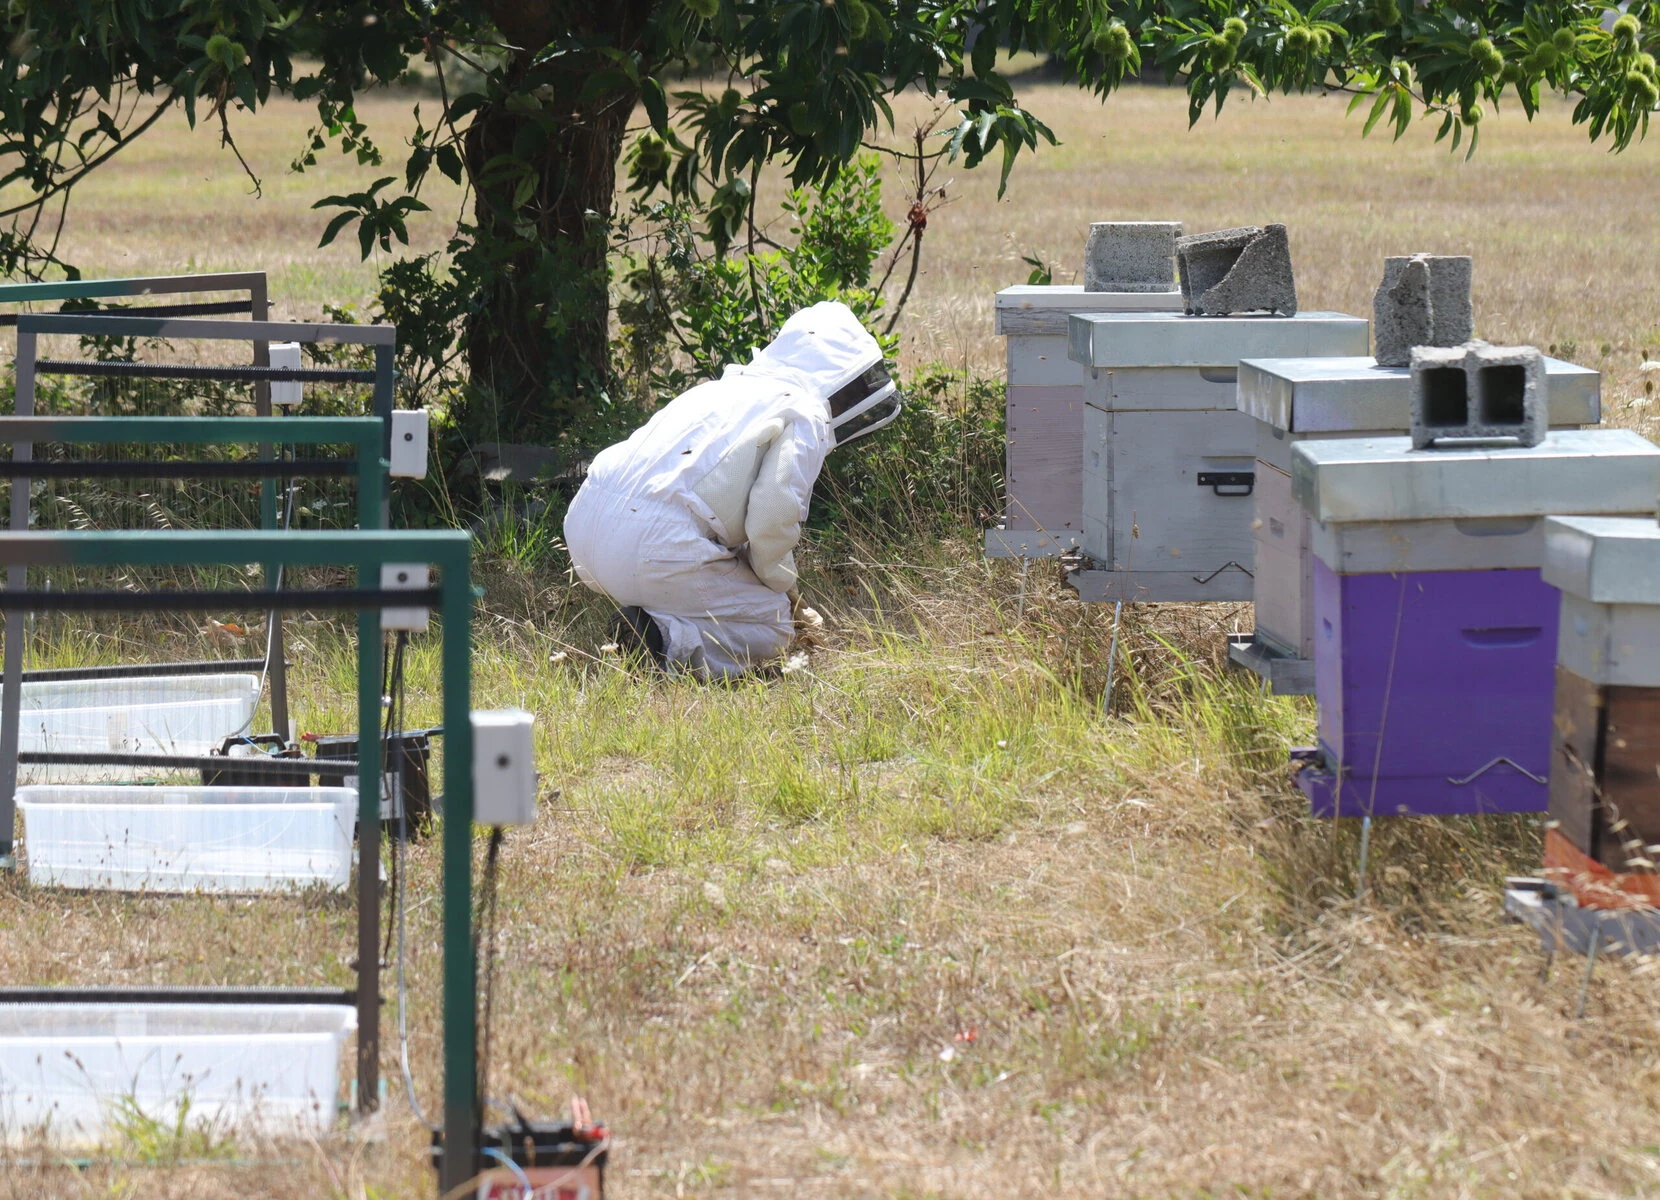 A beekeeper crouches in front of hives with electric harps set up in a row next to them.